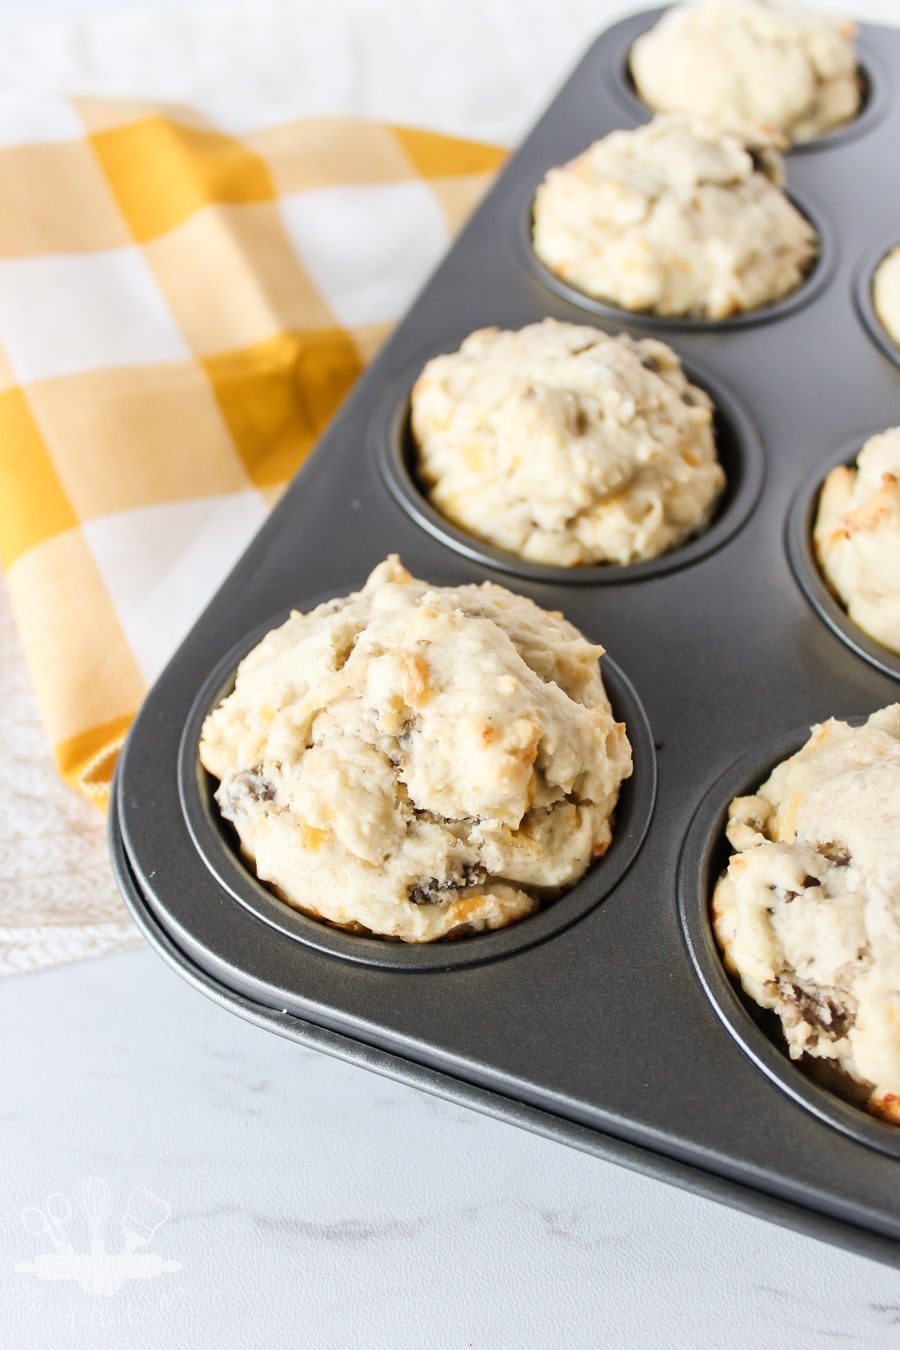 Savory Sausage and Cheese Breakfast Muffins